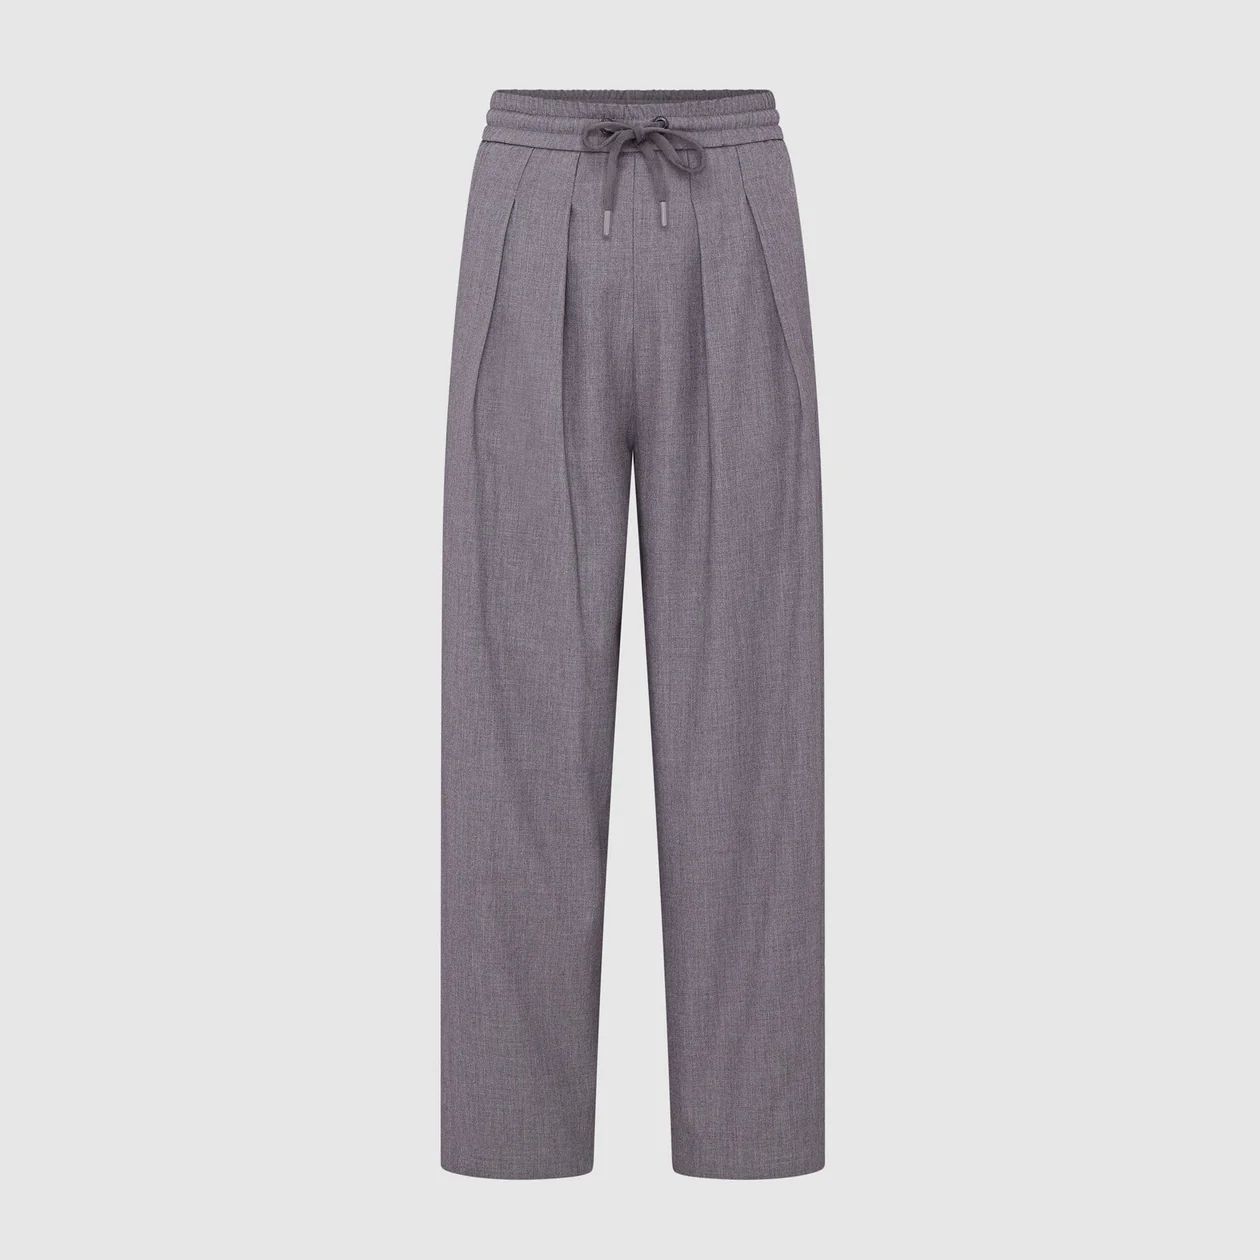 THE ULTIMATE RELAXED TROUSER - GREY | WAT The Brand